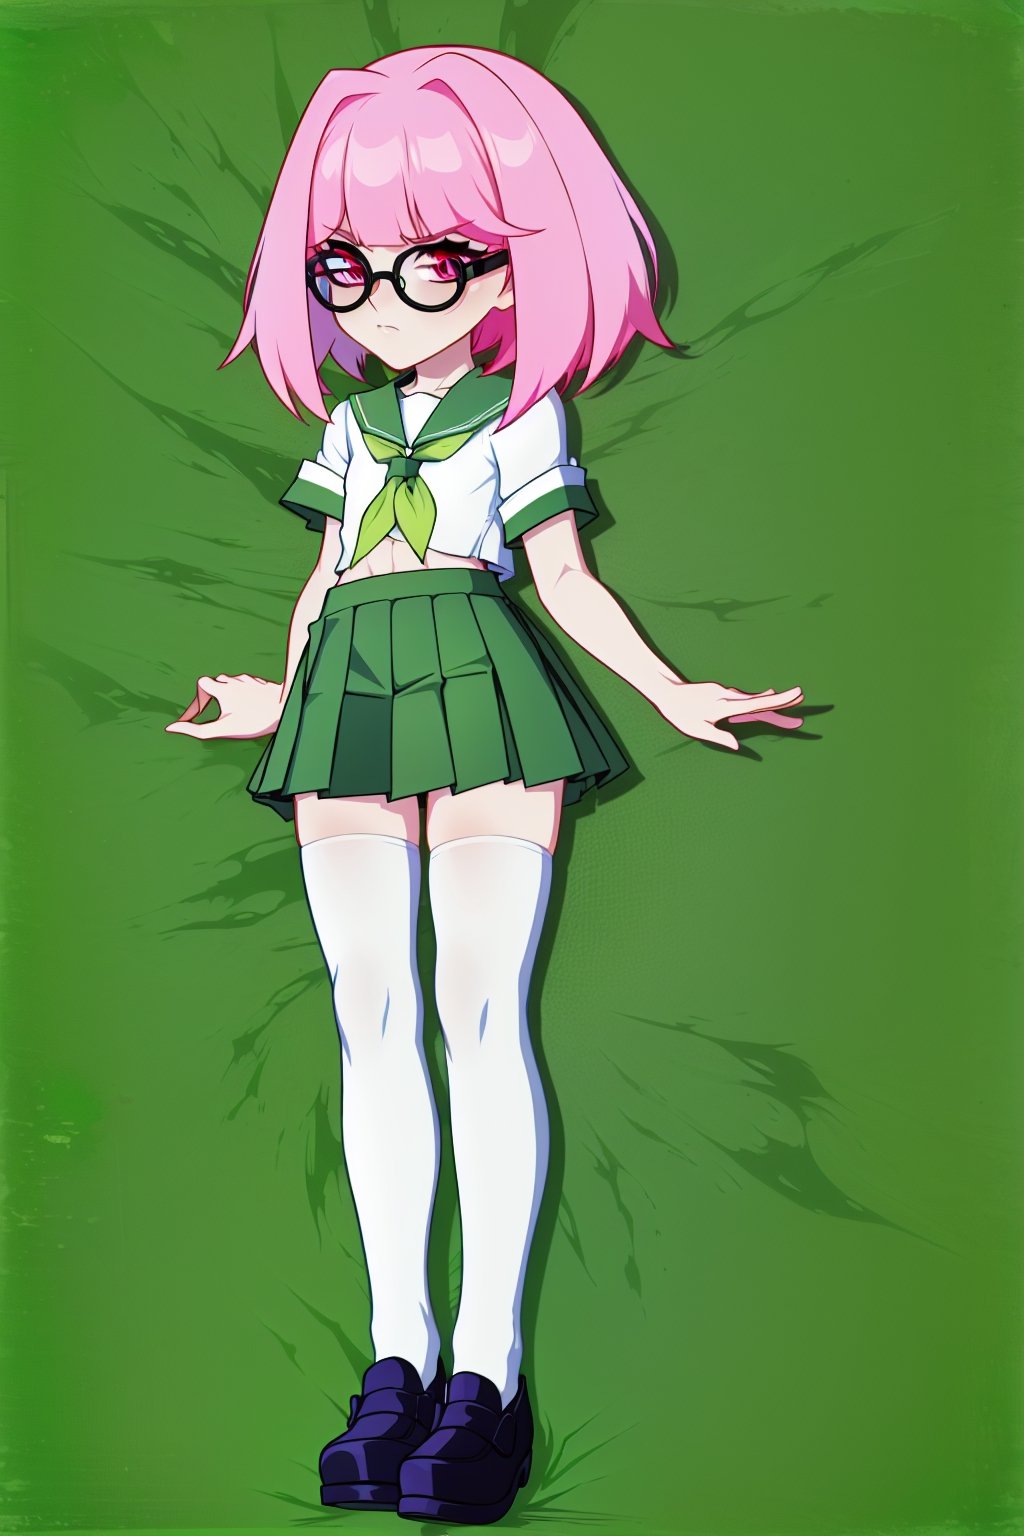 1 girl, solo, Saiki Kusuo, crimson eyes, pale pink hair, disheveled hair, sharp hair, short hair, spiky hair, prickly bangs, emotionless face, calm face, no emotions, cold face, Japanese school uniform, short green skirt, white shirt with short arms, green shirt collar, oval glasses, thin-rimmed glasses, black frames, matte lenses, the eyes are not visible behind the lenses of the glasses, white stockings, black flat shoes, perfect body, slim waist, thin shoulders, small breasts, moist skin, perfect body, abs, slim hips, elastic hips,

,USA,Mrploxykun